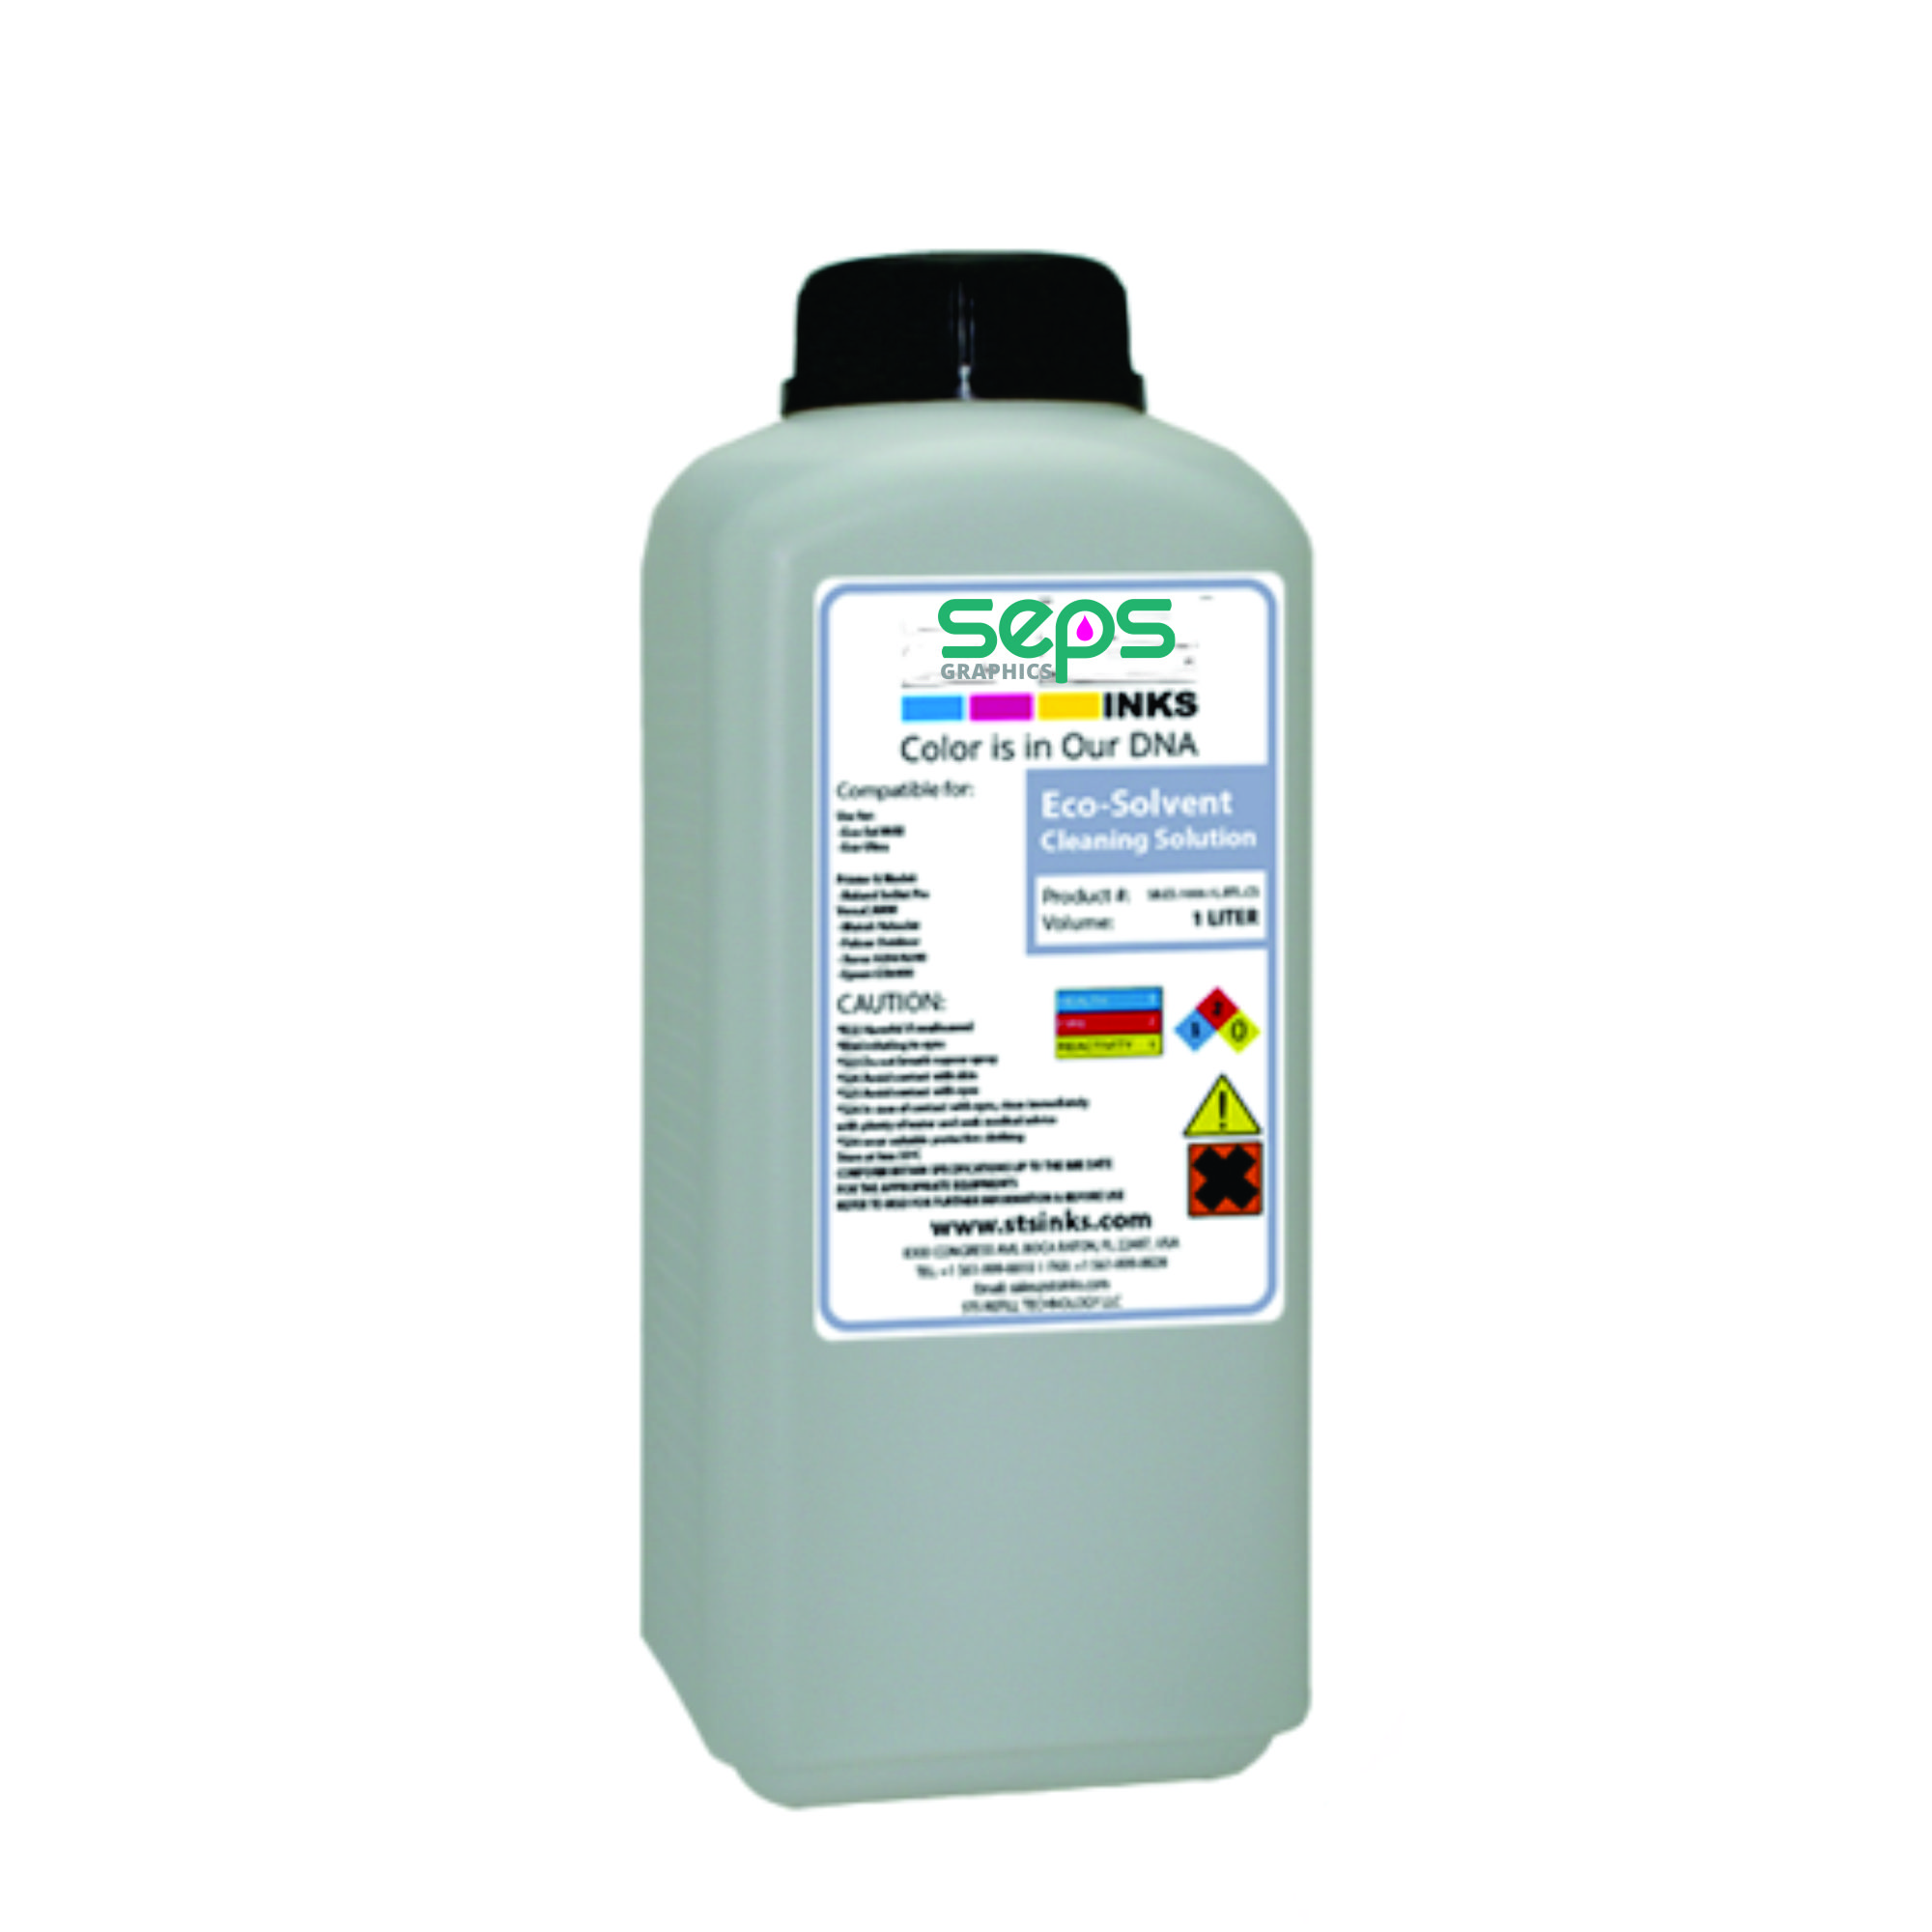 brother gt 541 cleaning solution bulk